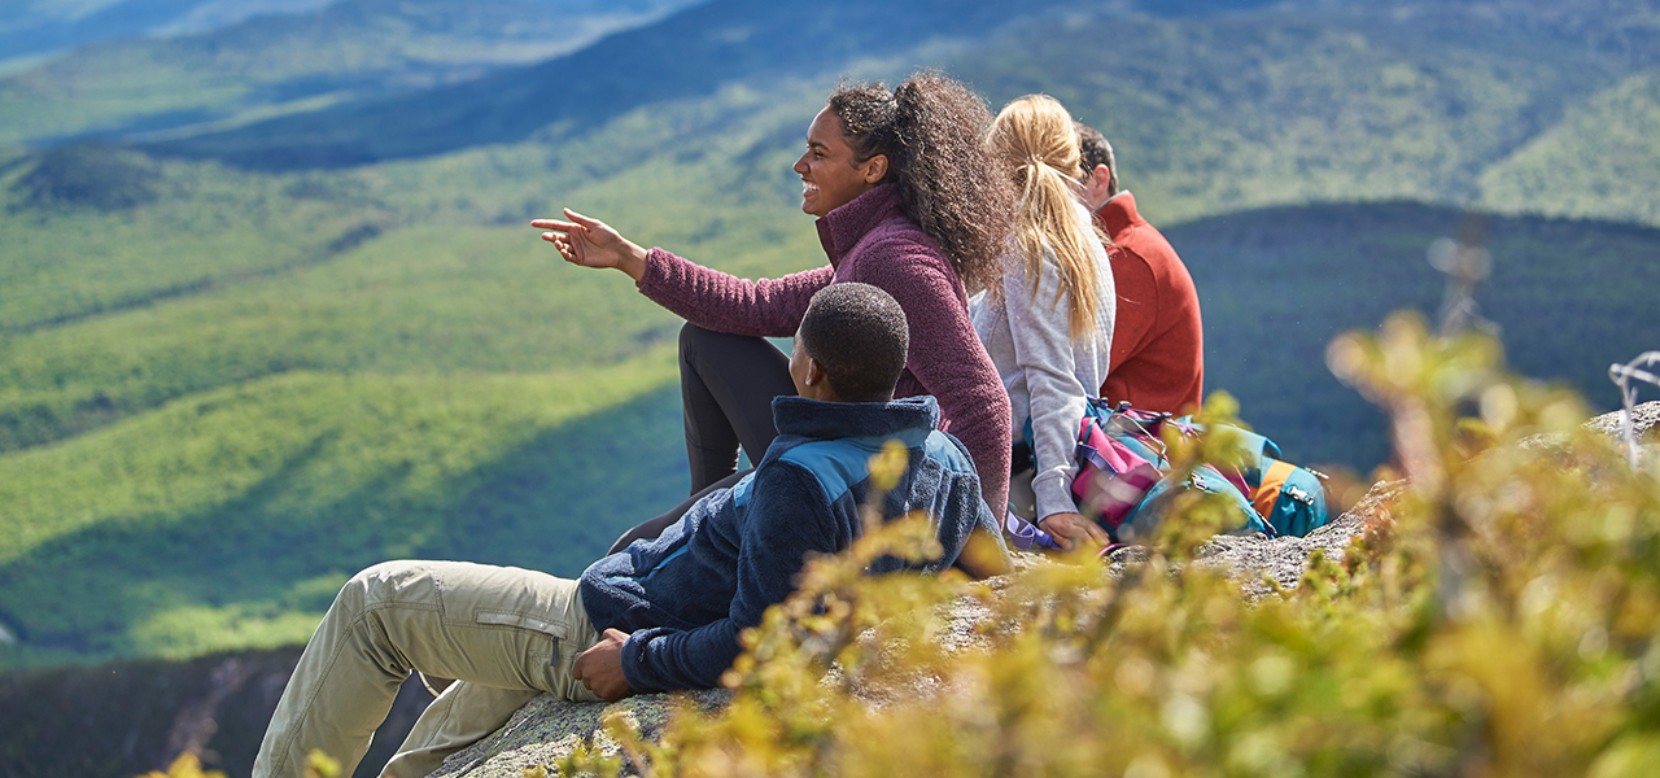 Group of people sitting, looking out over a mountain landscape.